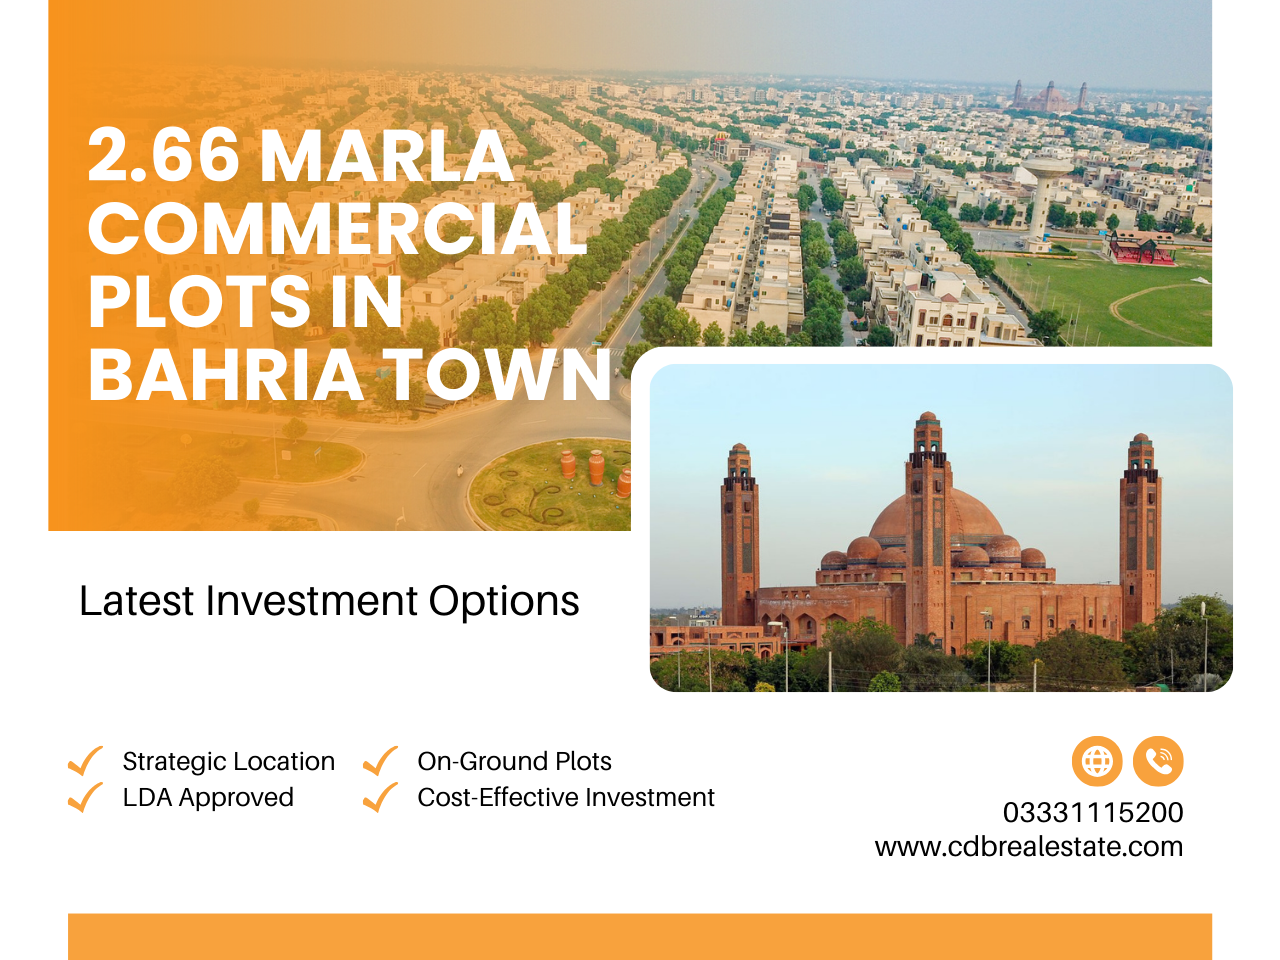 2.66 Marla Commercial Plots in Bahria Town